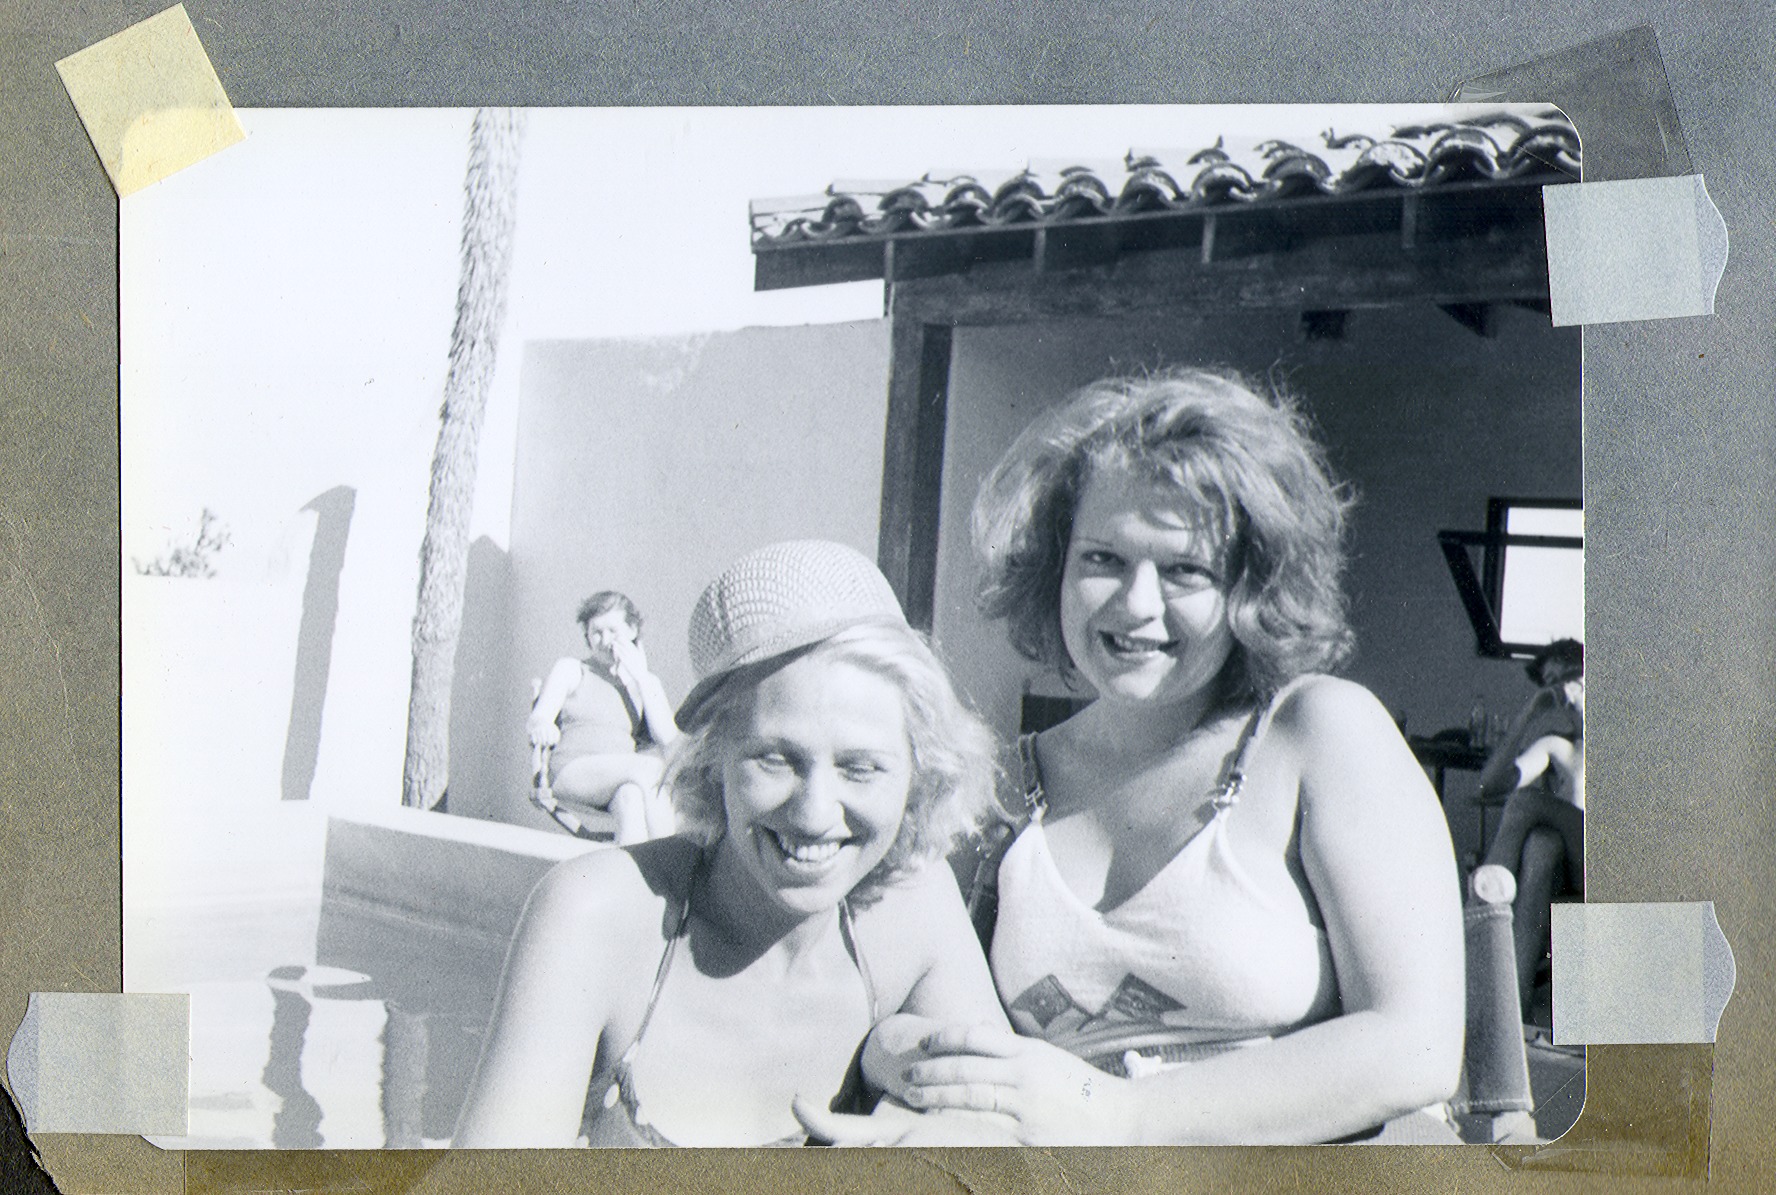 Clara and Carmen Schmidt in bathing suits by the pool: photographic print